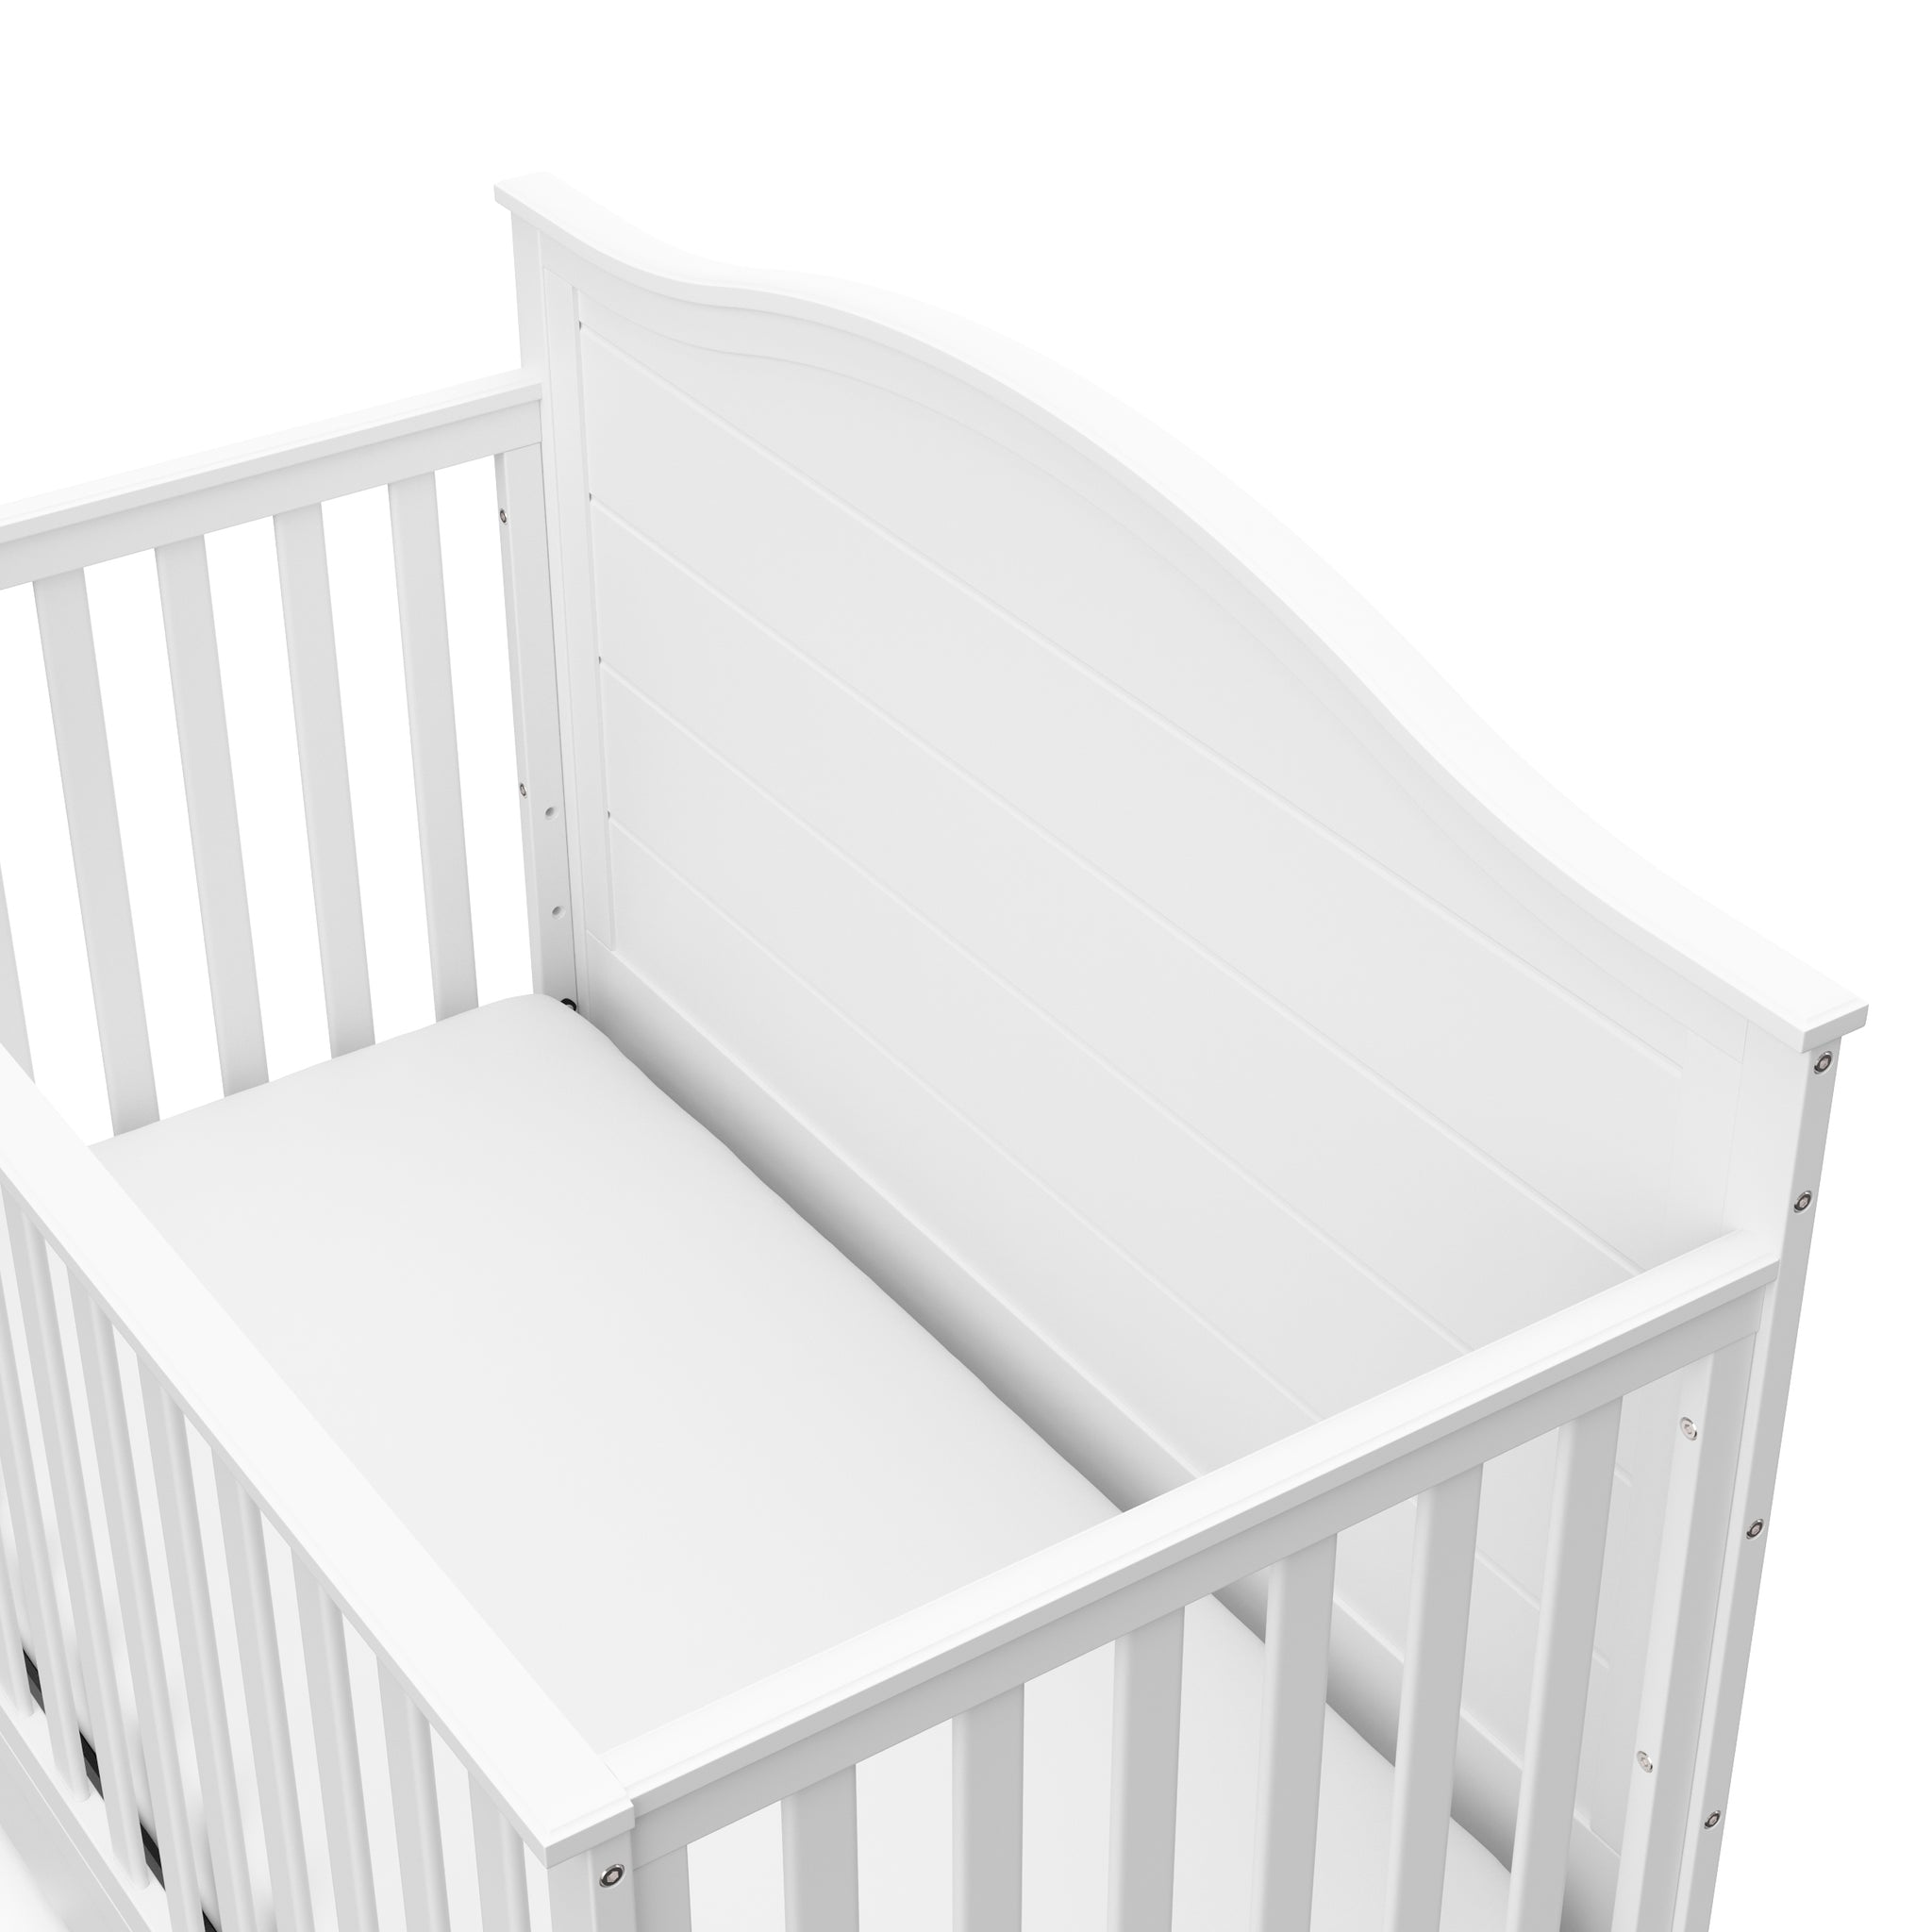 Close-up view of white crib with drawer headboard